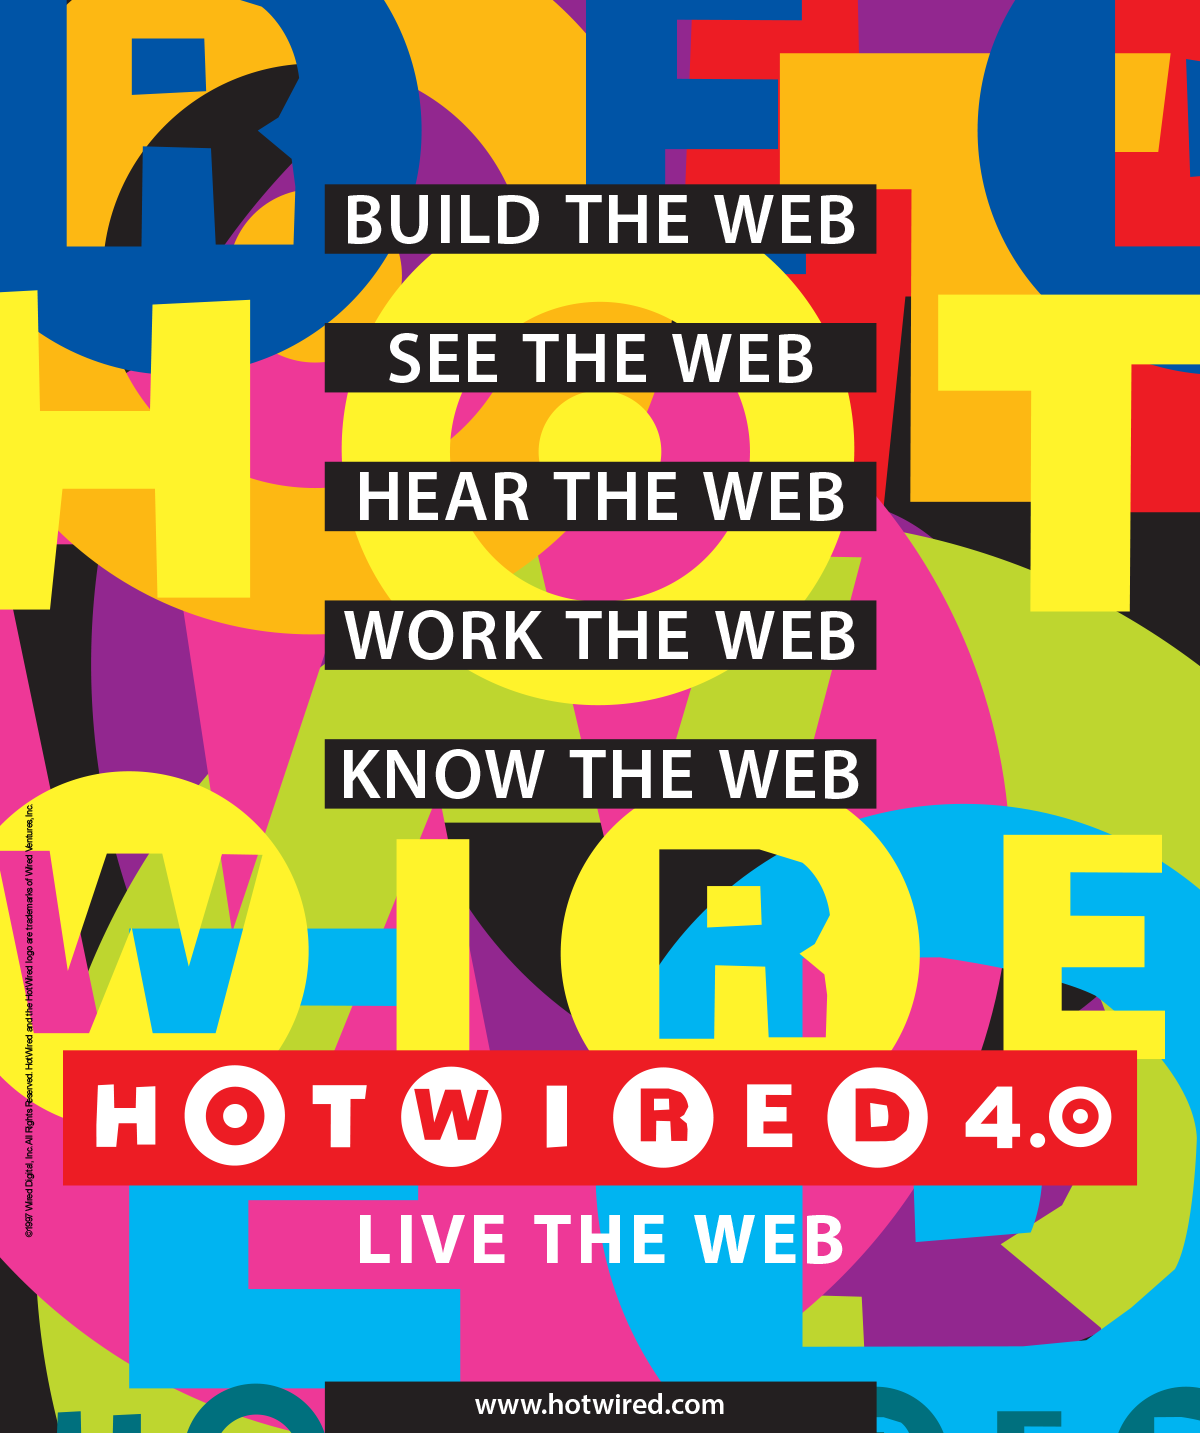 HotWired 4.0 ad: Build the Web, See the Web, Hear the Web, Work the Web, Know the Web, Live the Web